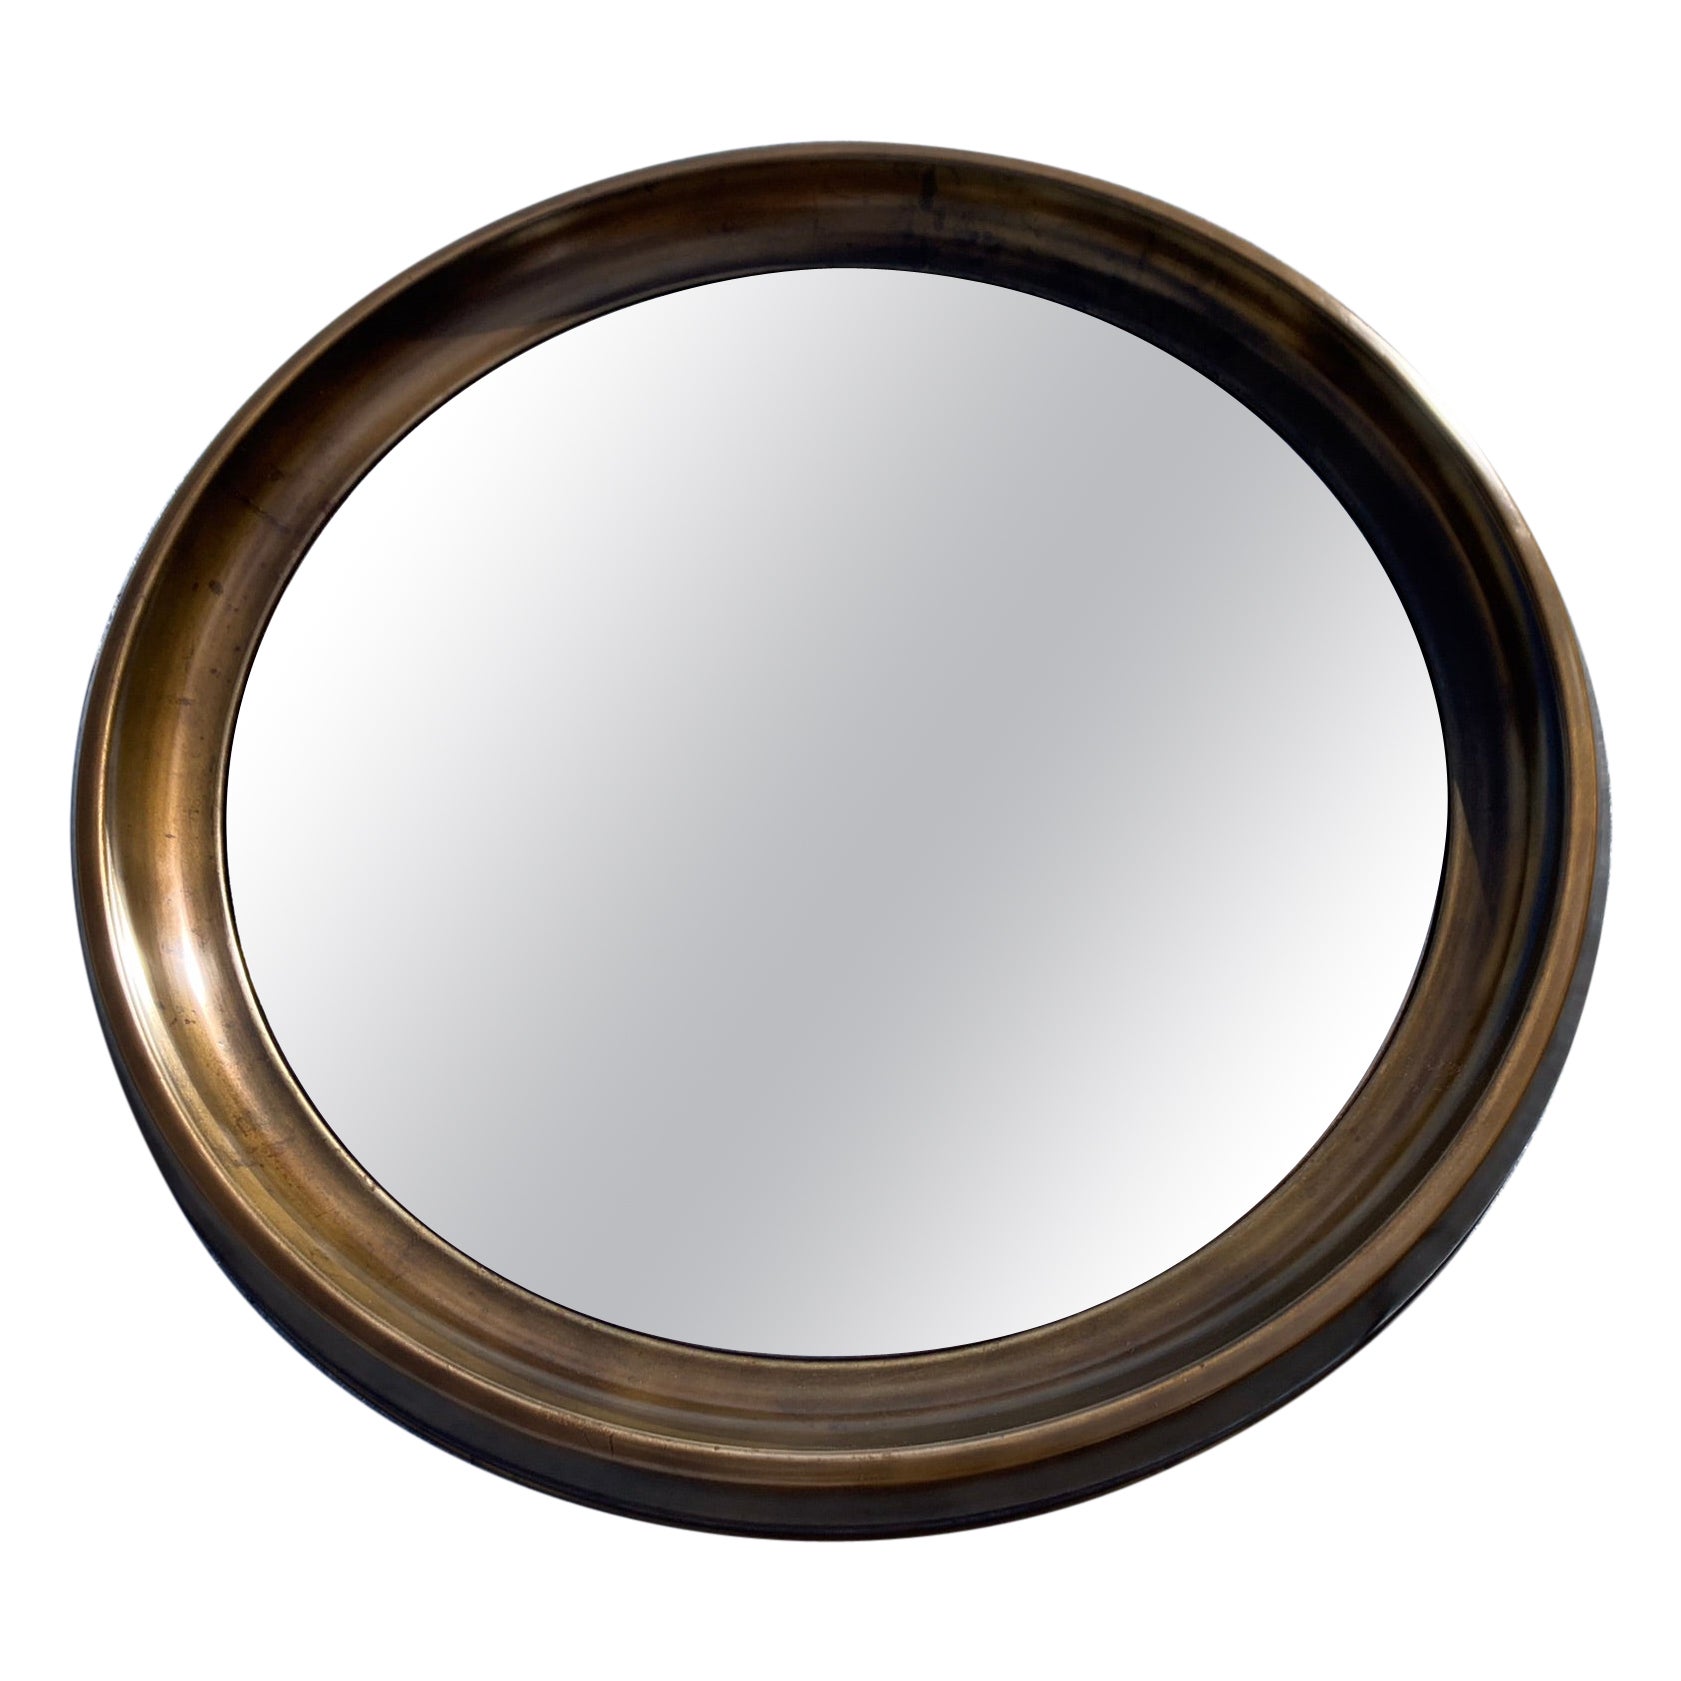 Large Round Mid-Century Modern Wall Mirror, Brass, 1970s For Sale